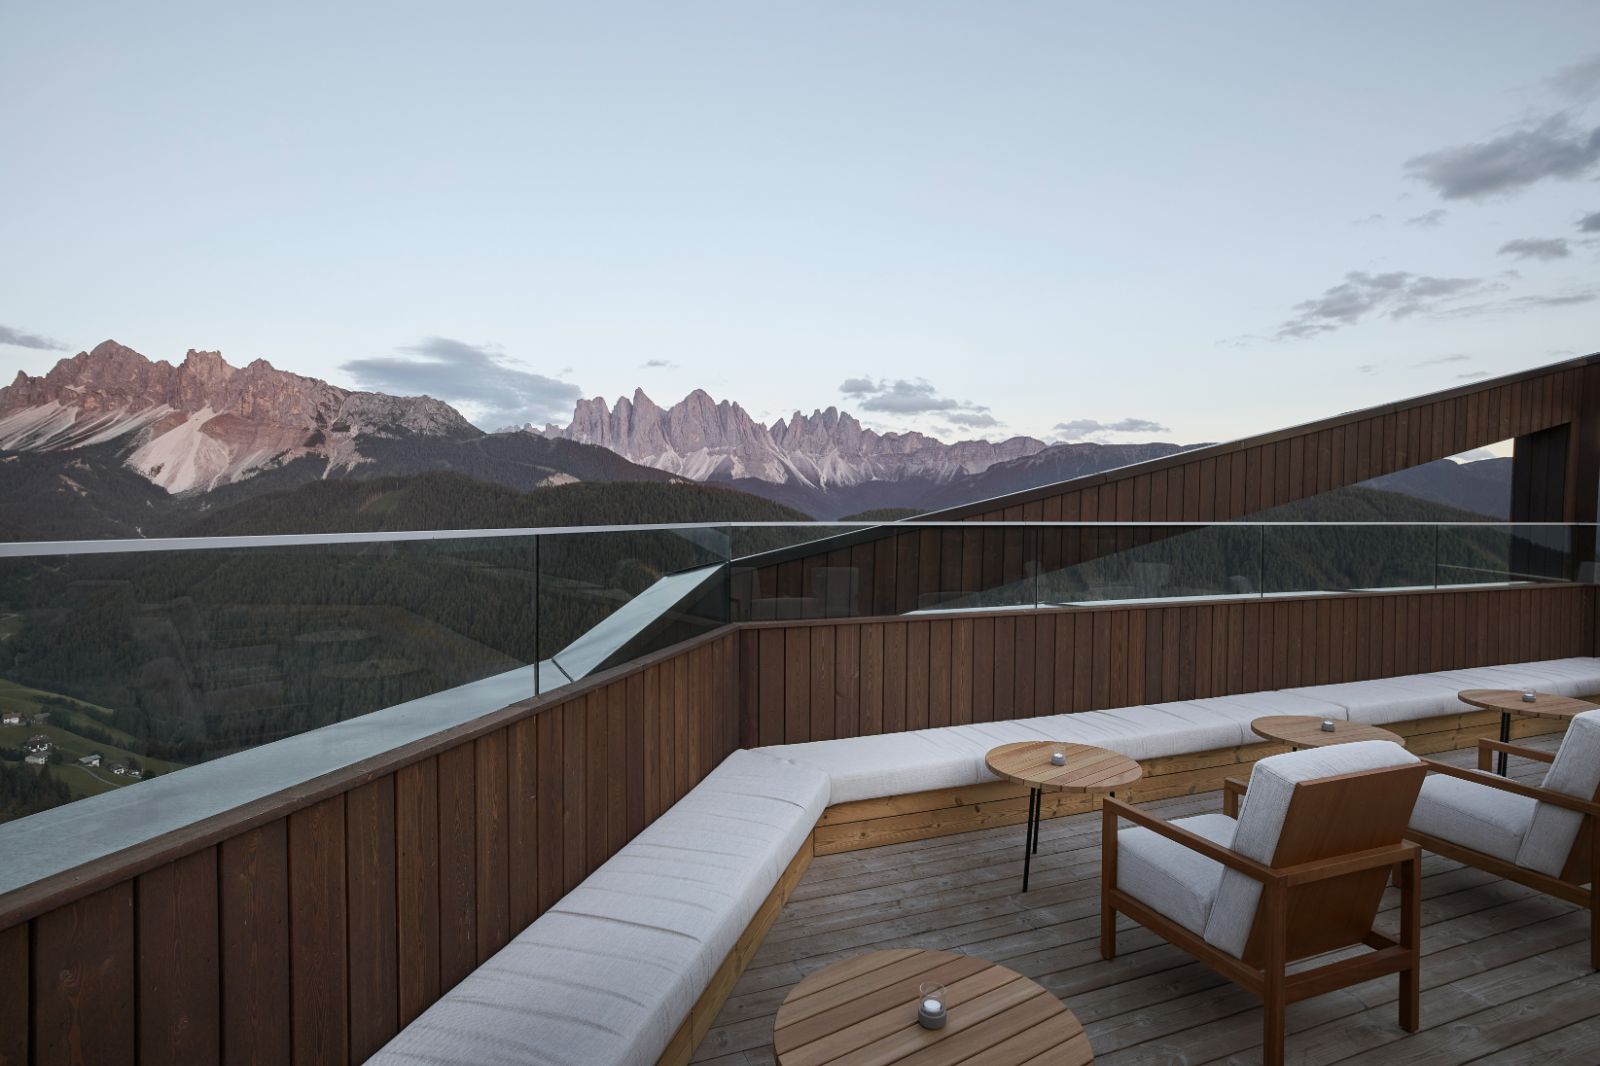 Rooftop terrace at the Forestis hotel in the Dolomites